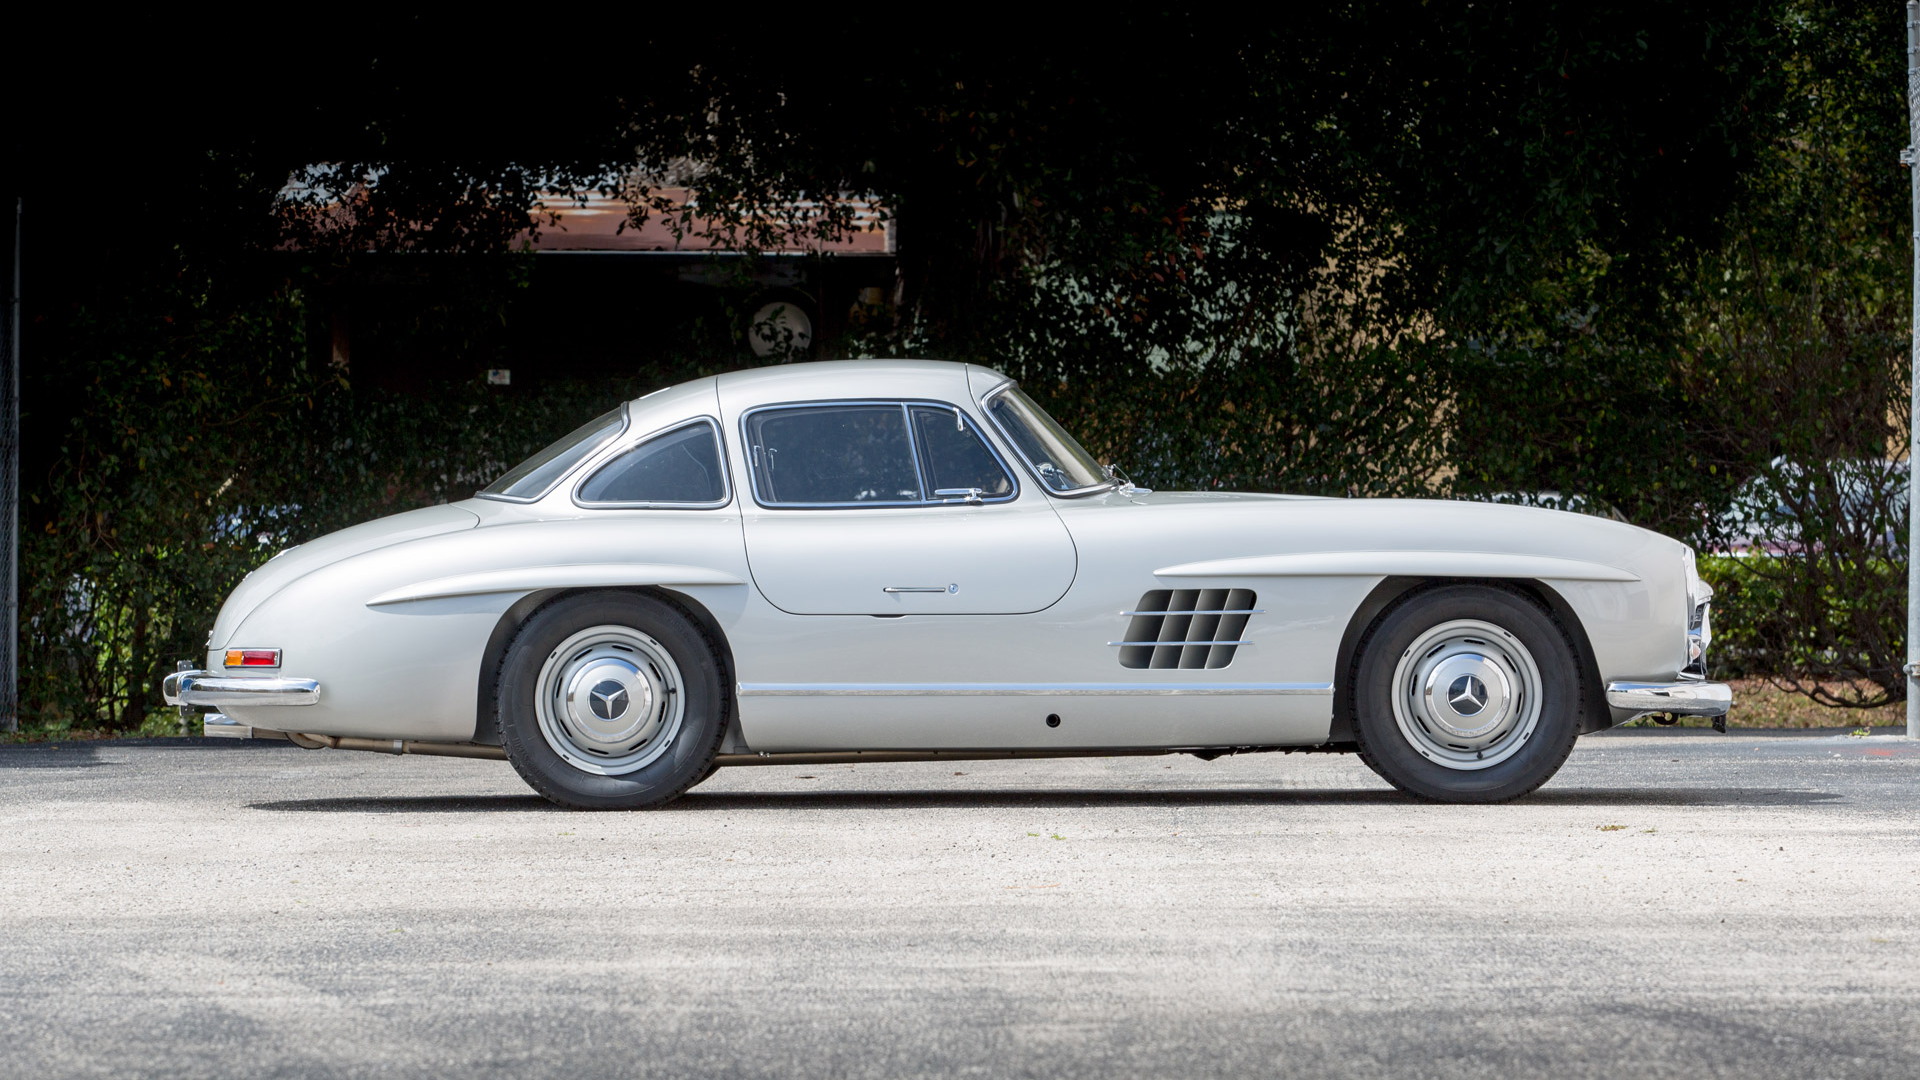 1954 Mercedes-Benz 300SL with chassis number #198 040 4500003, the first of the gullwings